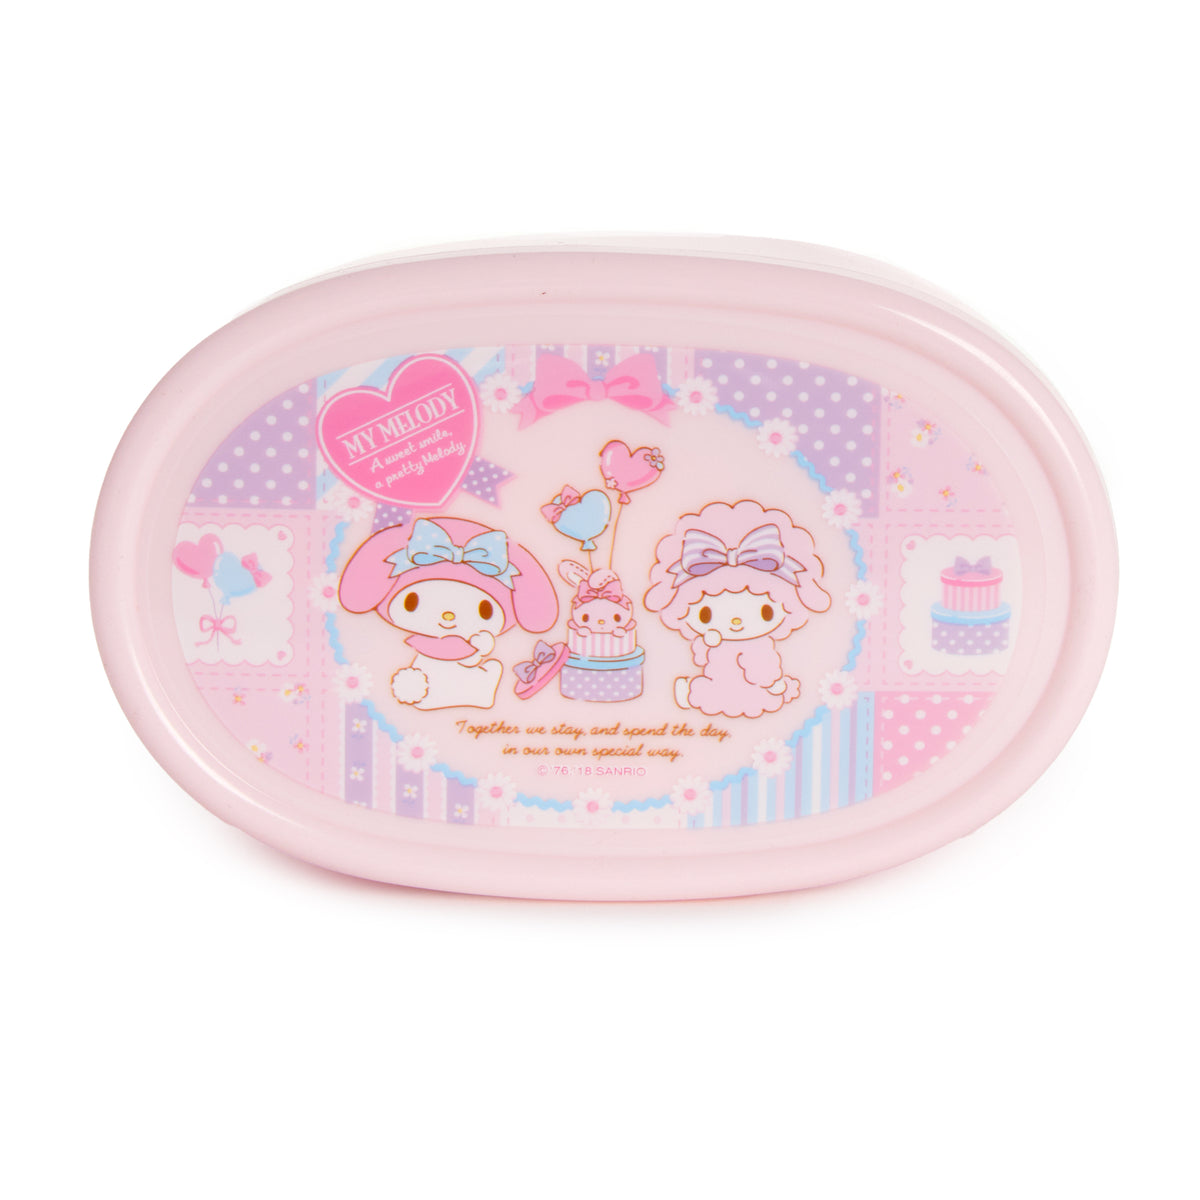 My Melody &amp; My Sweet Piano Patchwork Containers (Set of 3) Kitchen Sanrio   